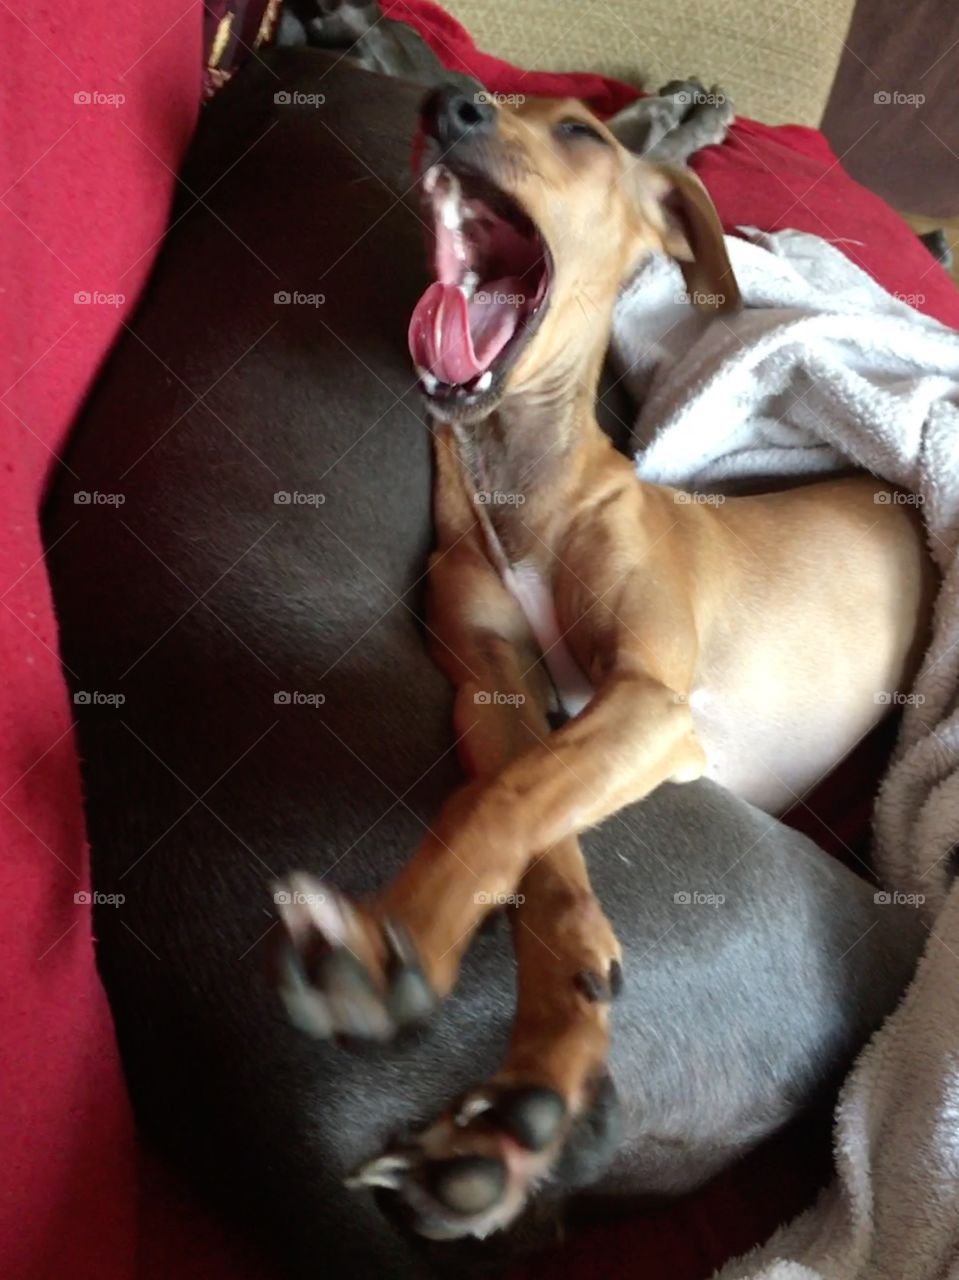 Amber the Italian greyhound caught in mid-yawn while laid on the sofa relaxing snuggled up to Libby the whippet